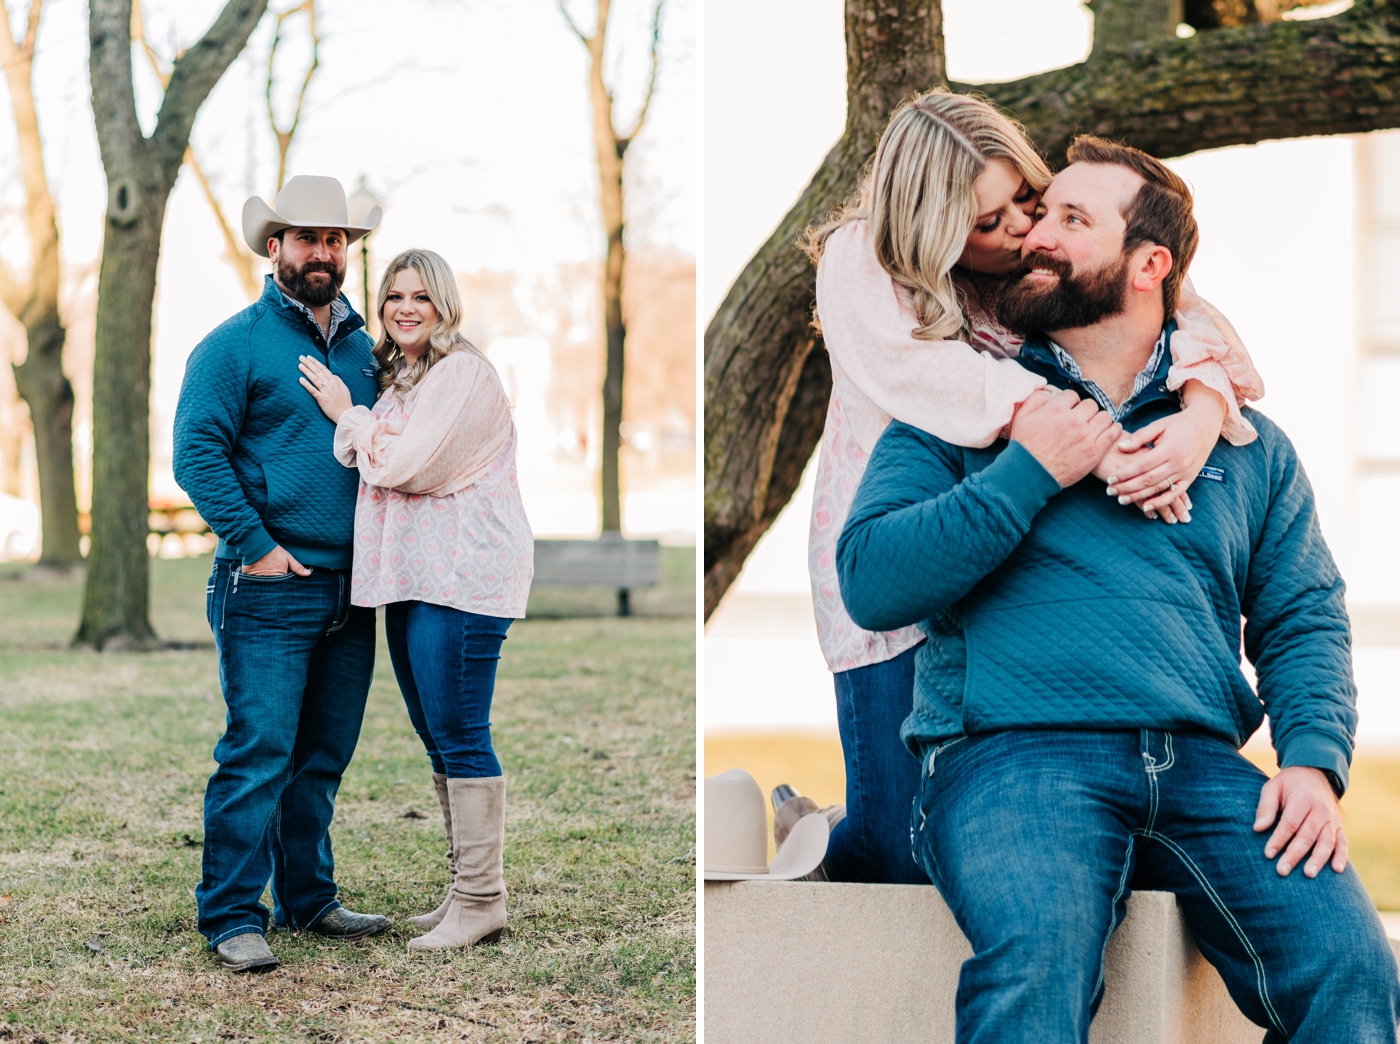 Engagement session at Indiana Wold War Memorial